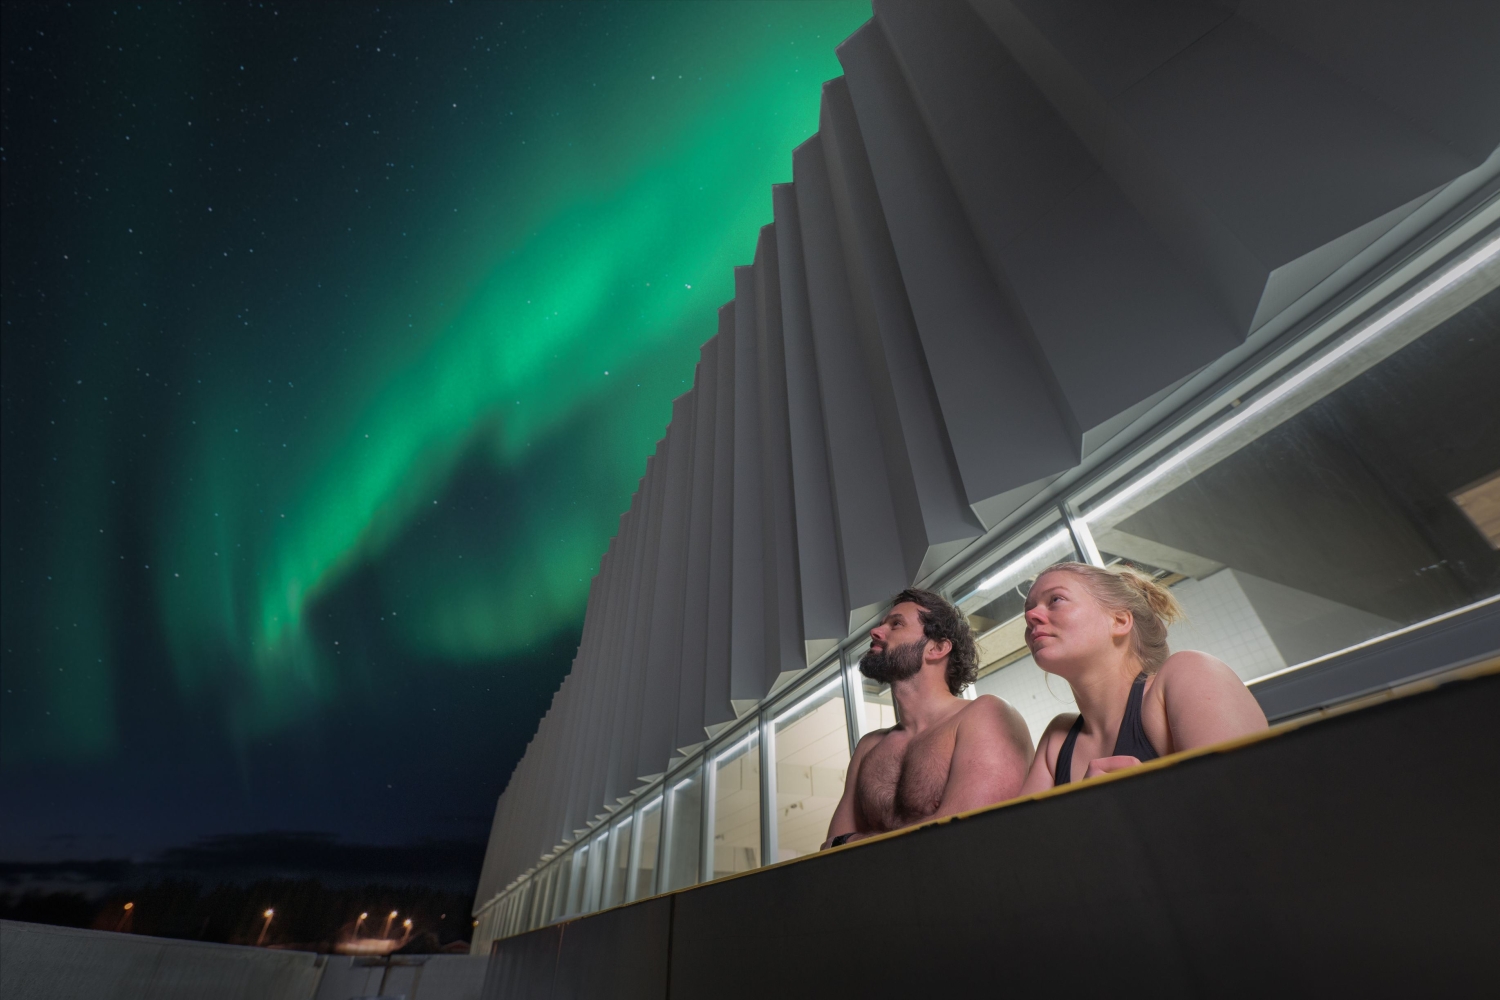 Man and woman in a pool under the Northern Light sky